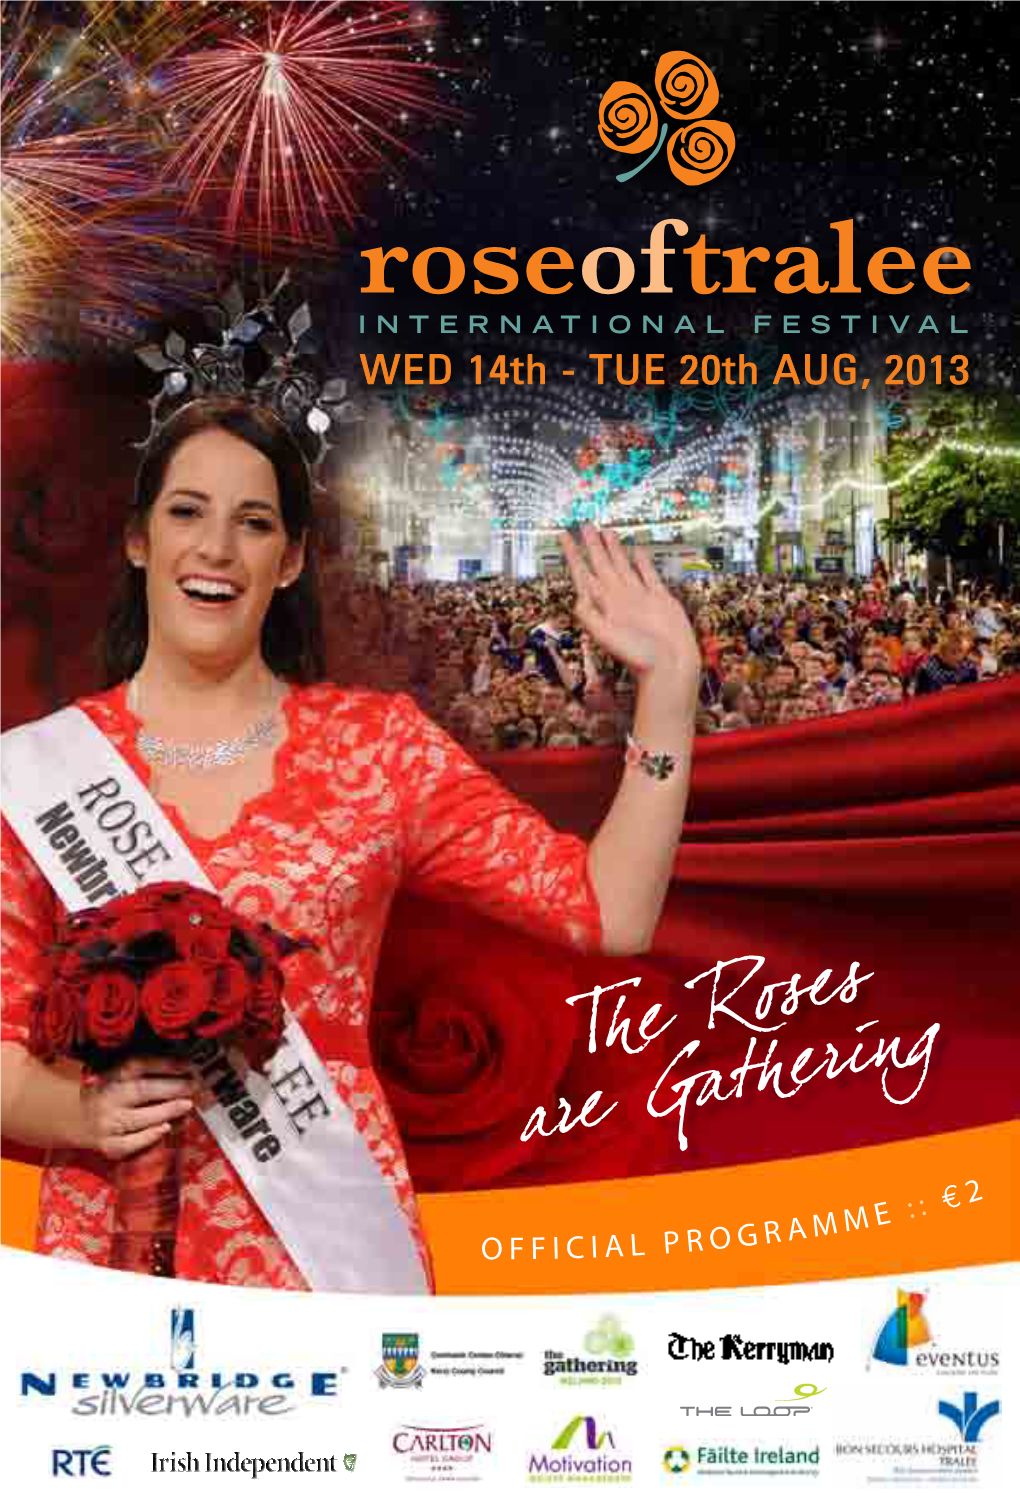 Official PROGRAMME 2013 1 Ceád Míle Fáilte Go Trá Lí and to the 2013 Rose of Hello and Welcome to Our Wonderful, Magical and Tralee International Festival